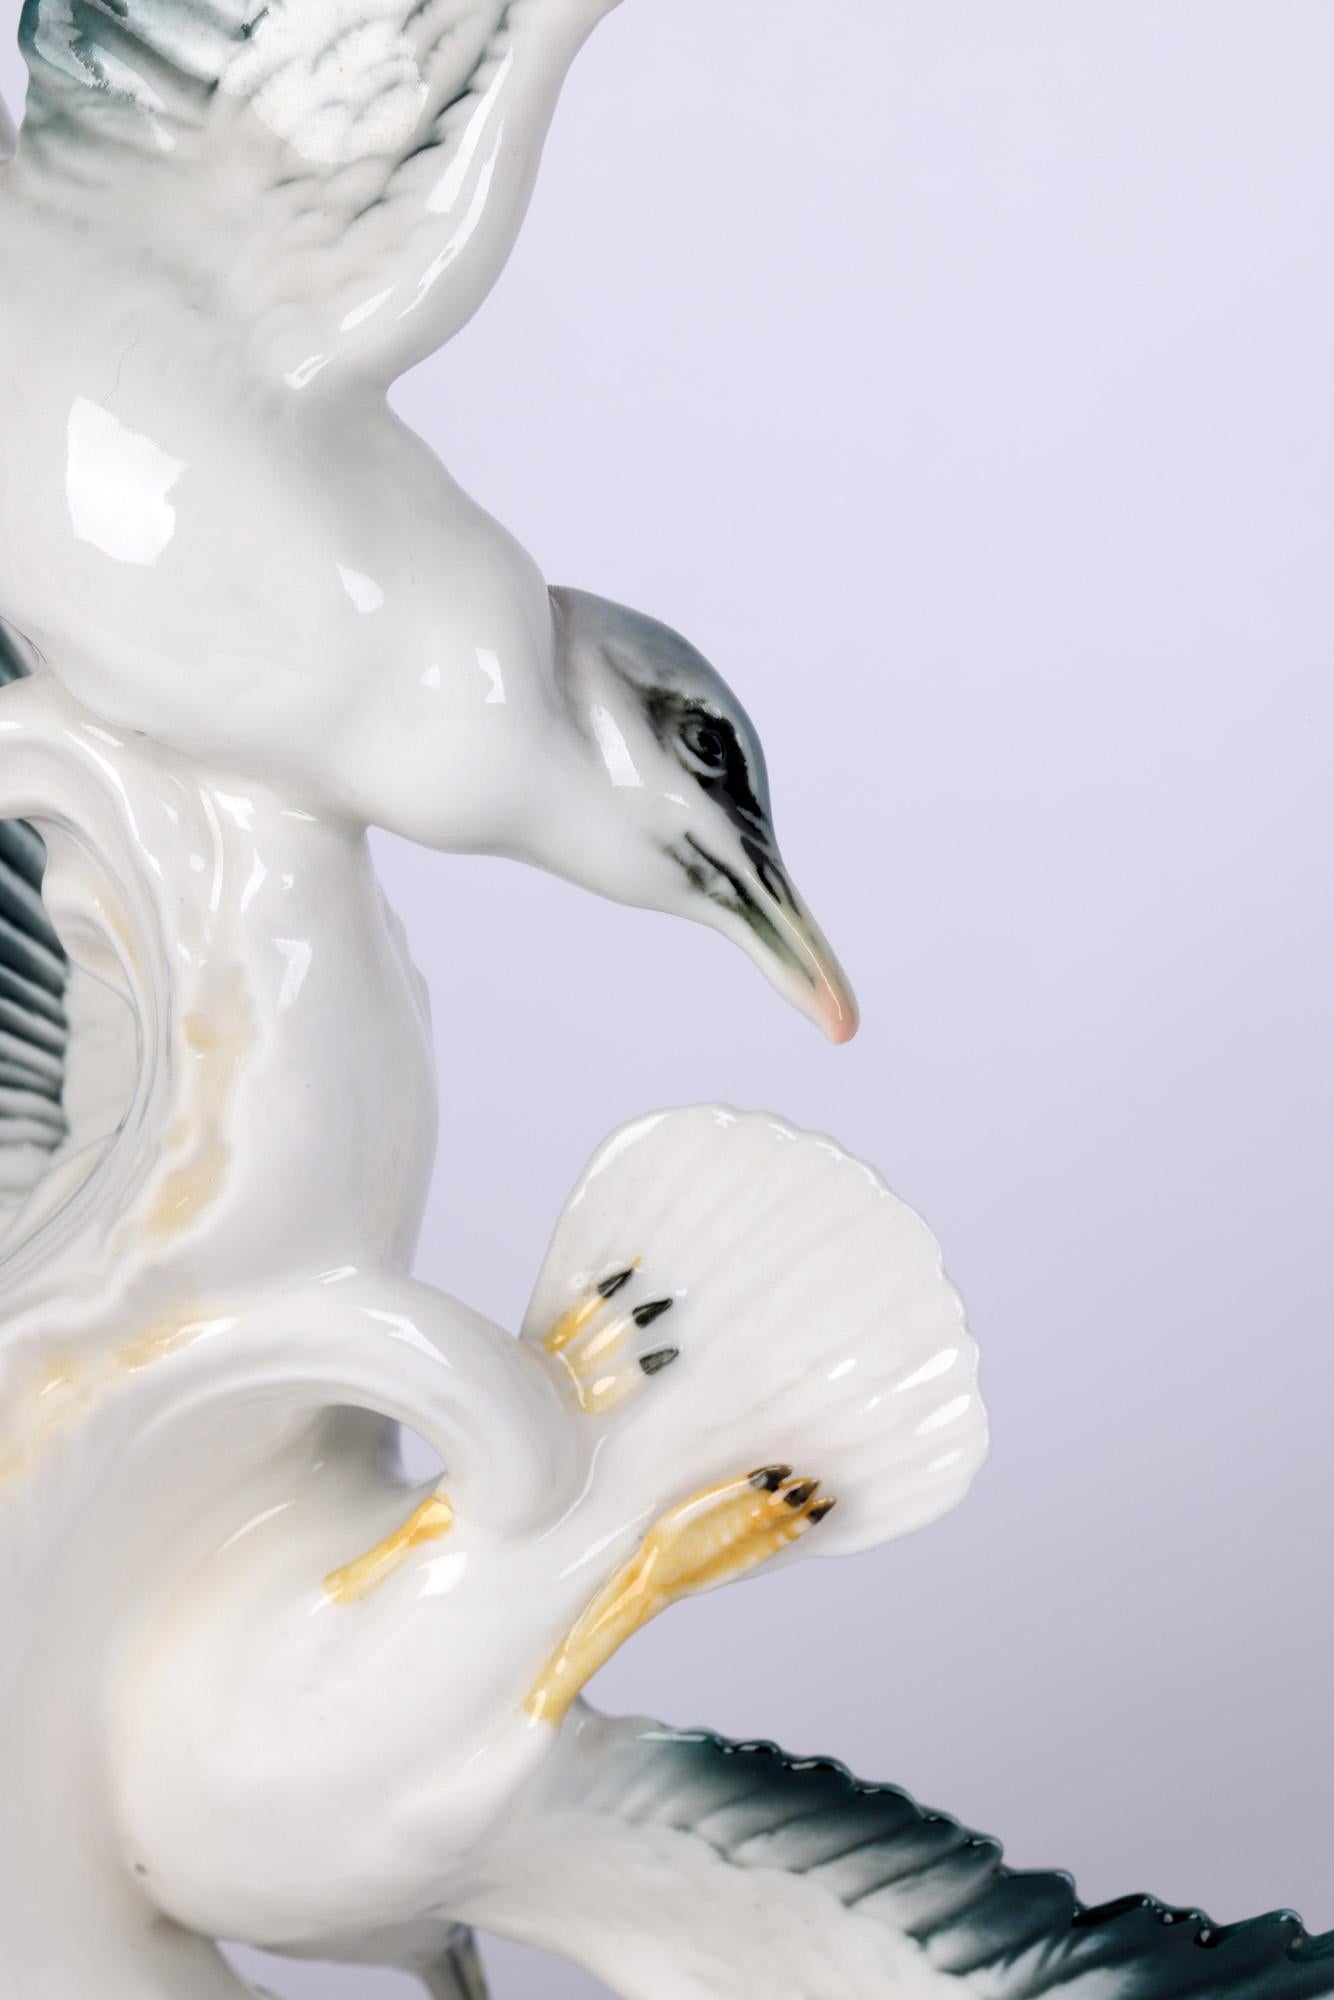 A wonderful German porcelain portrayal of two swooping seagulls by renowned porcelain maker Karl Ens Volkstedt made between 1919 and 1945. The figures are finely modelled and mounted on a tall wave shaped base with wings overlapping and swooping